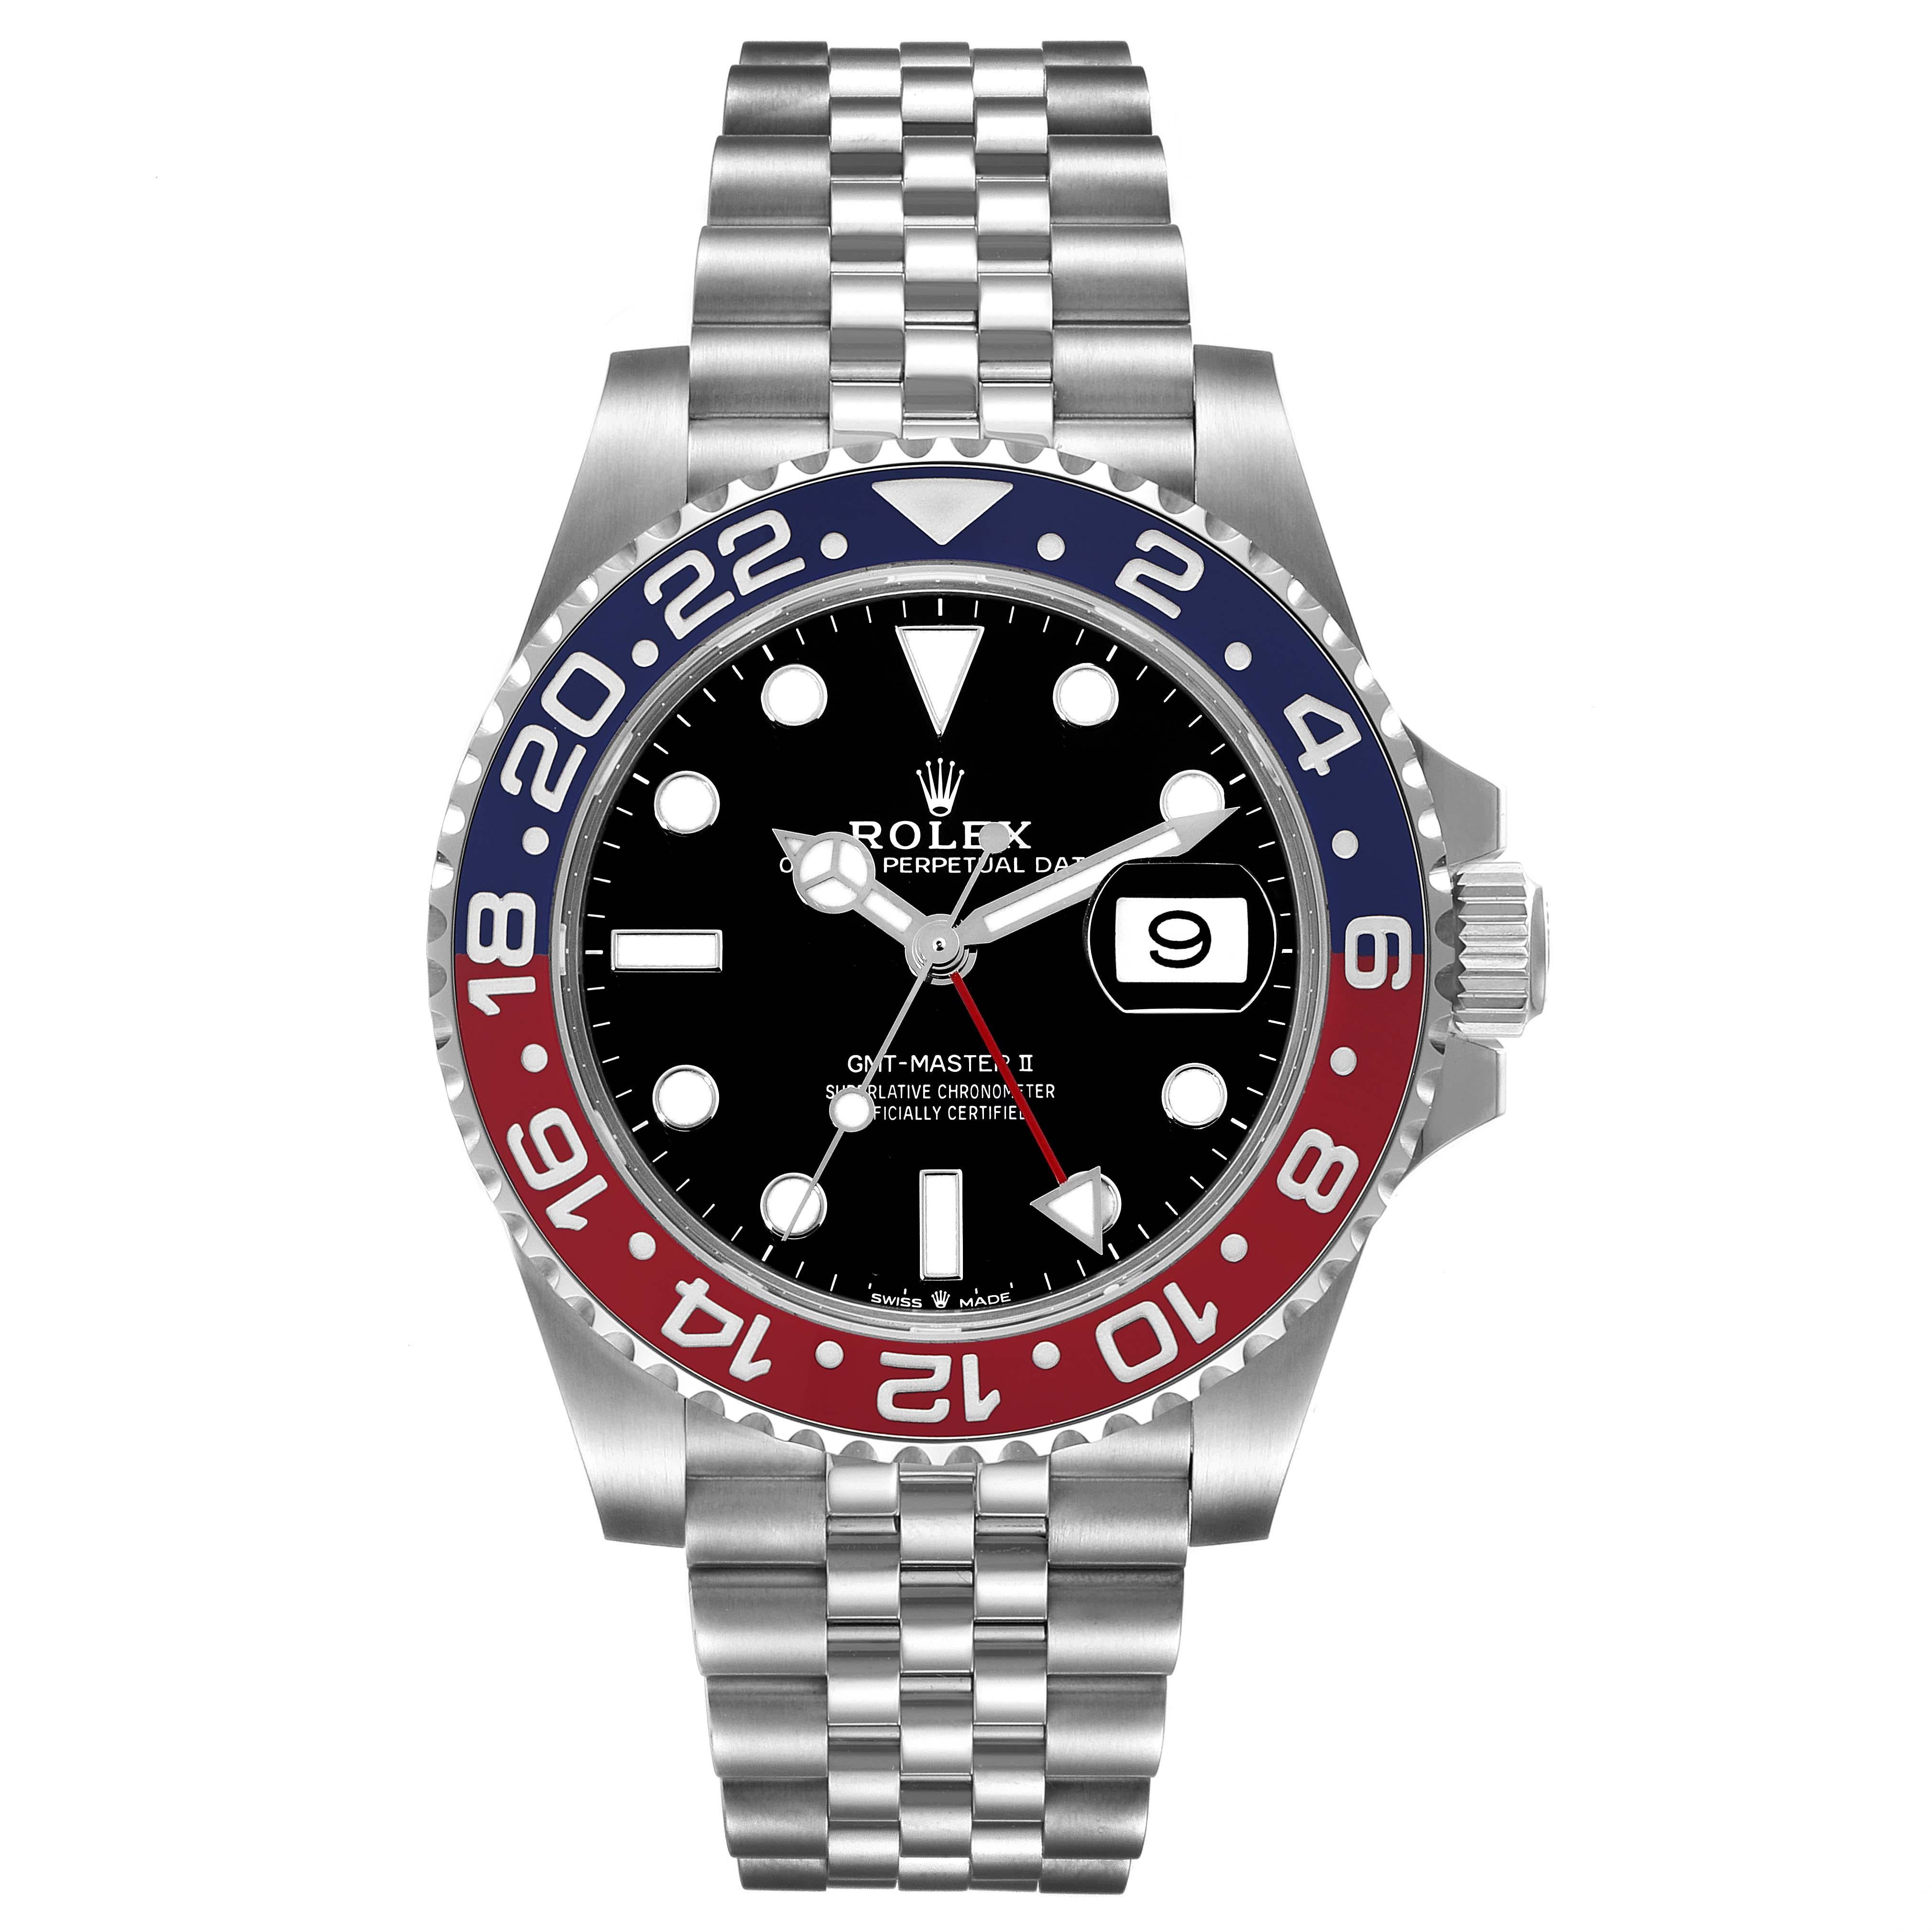 Rolex GMT Master II Pepsi Bezel Jubilee Steel Mens Watch 126710 Box Card. Officially certified chronometer automatic self-winding movement. Stainless steel case 40 mm in diameter. Rolex logo on the crown. Stainless steel bidirectional rotating bezel